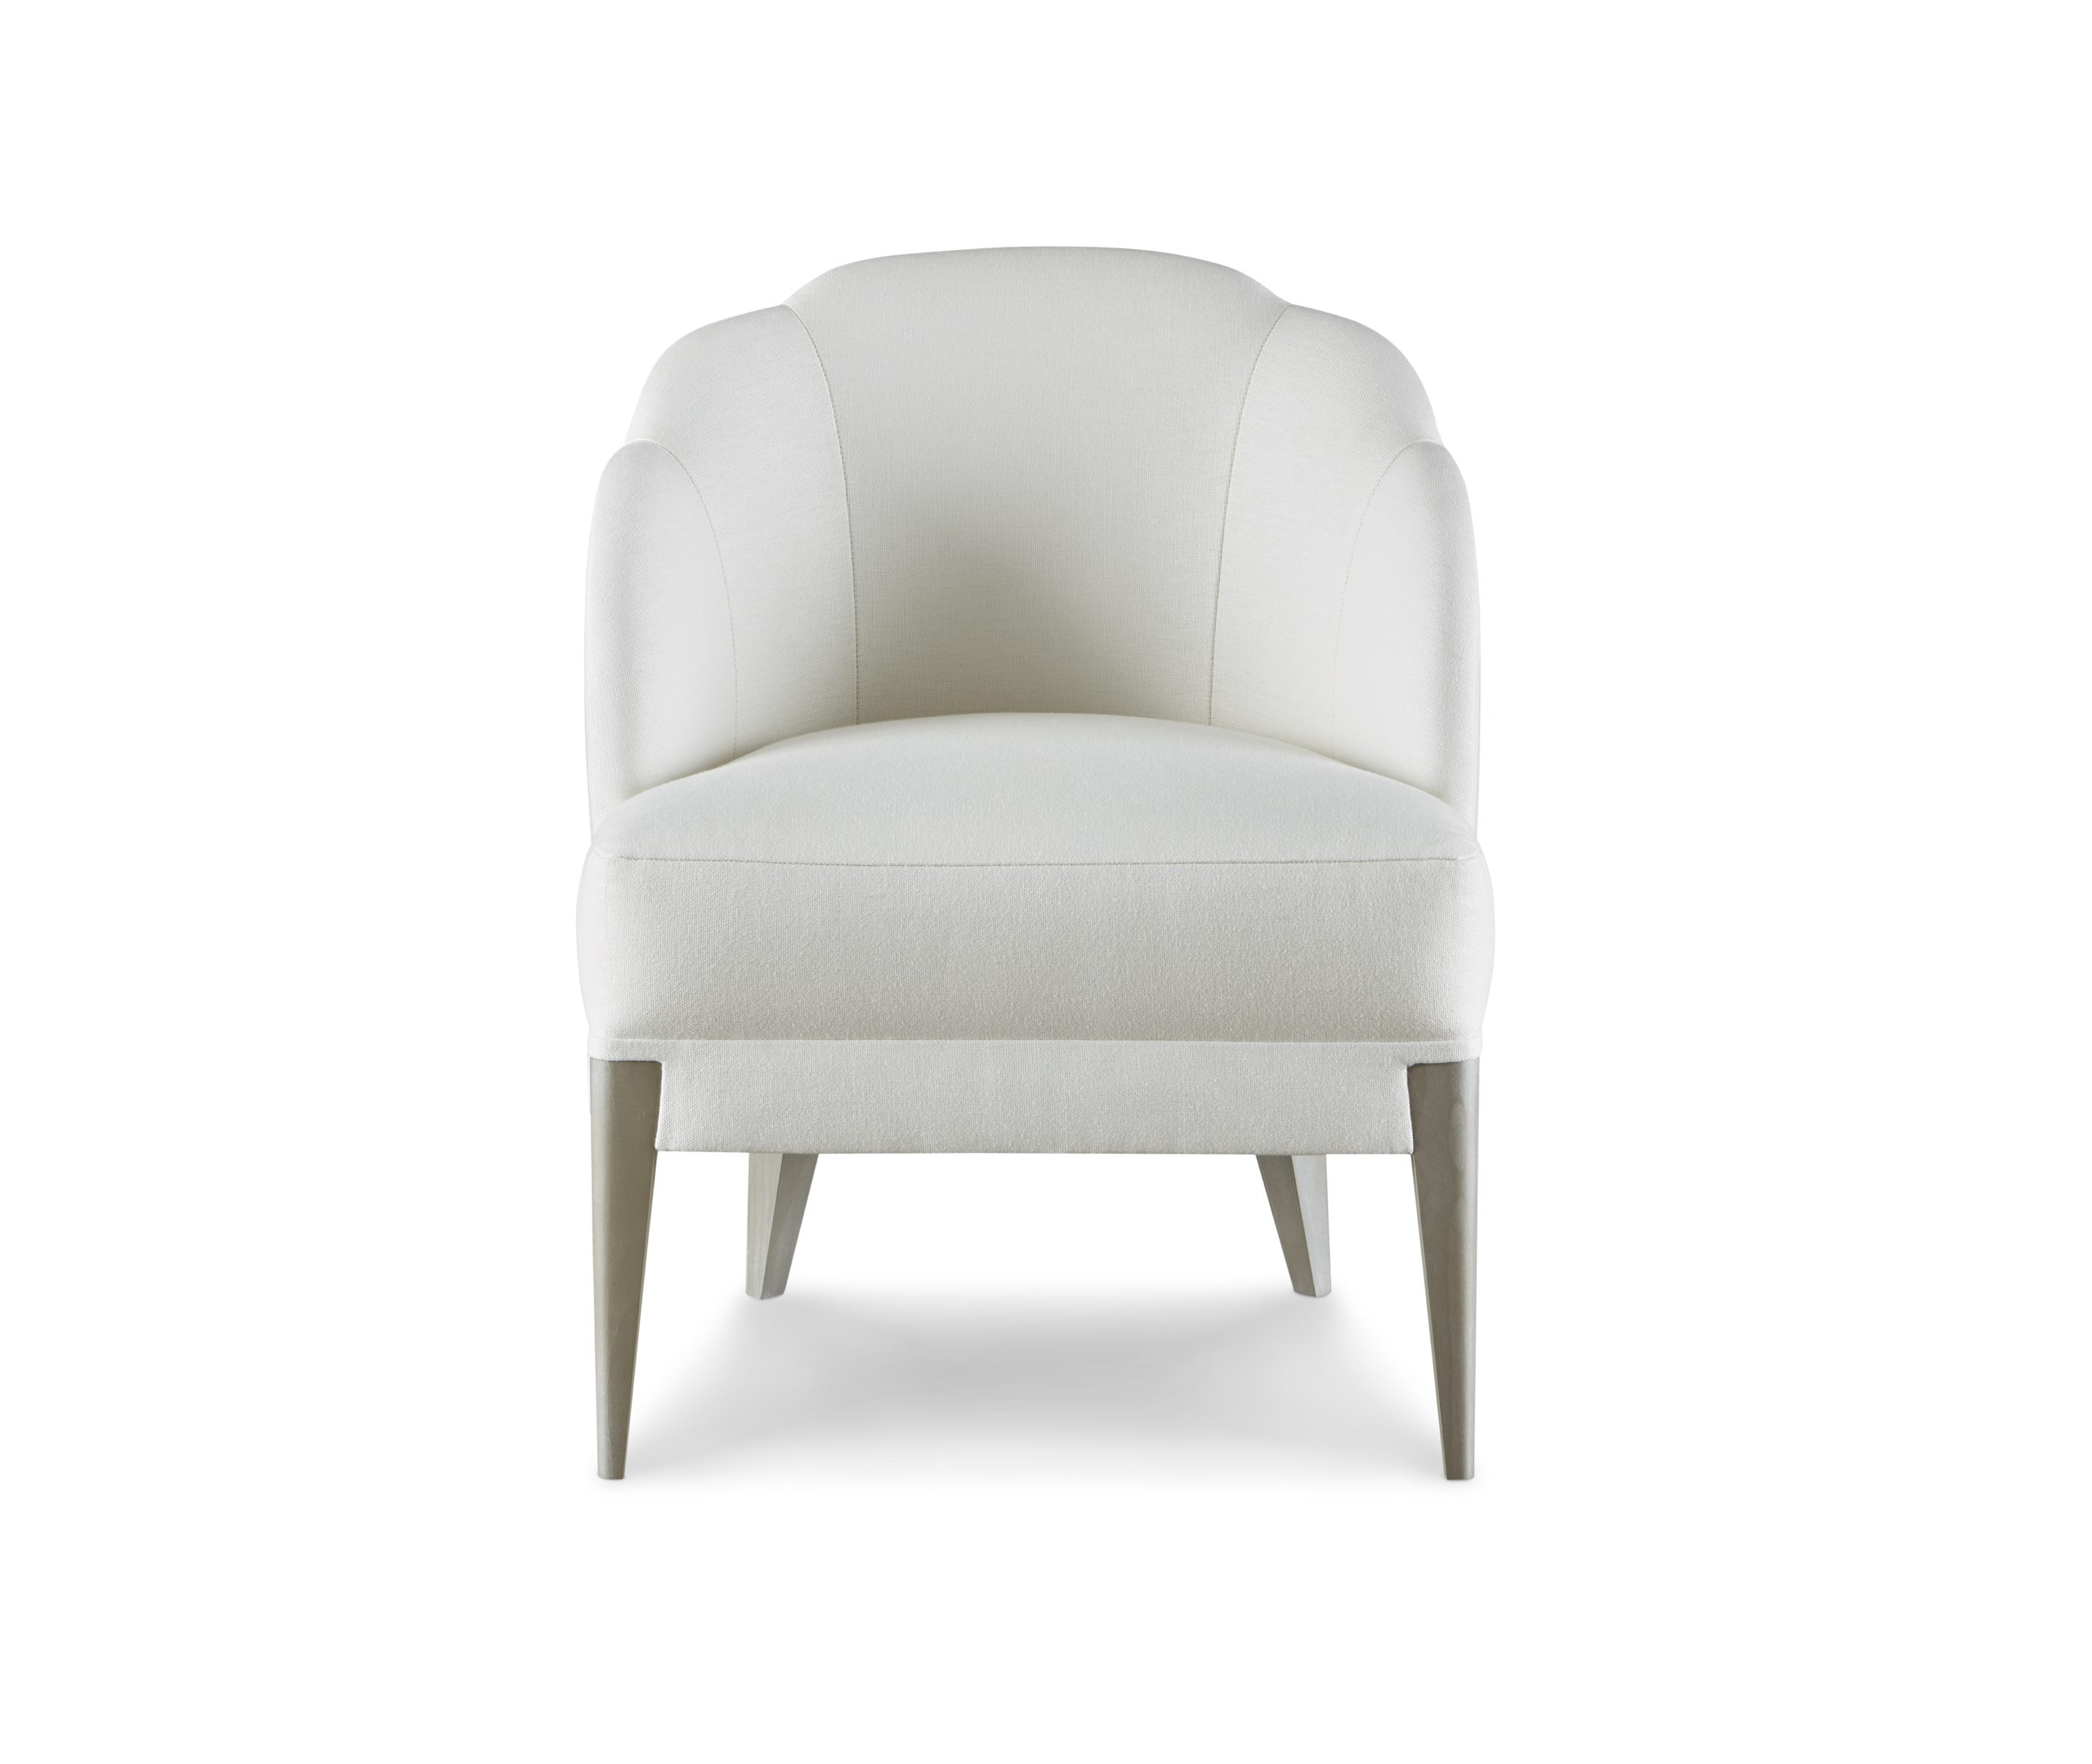 Baker_products_WNWN_sophie_chair_BAU3306c_FRONT-2-scaled-1